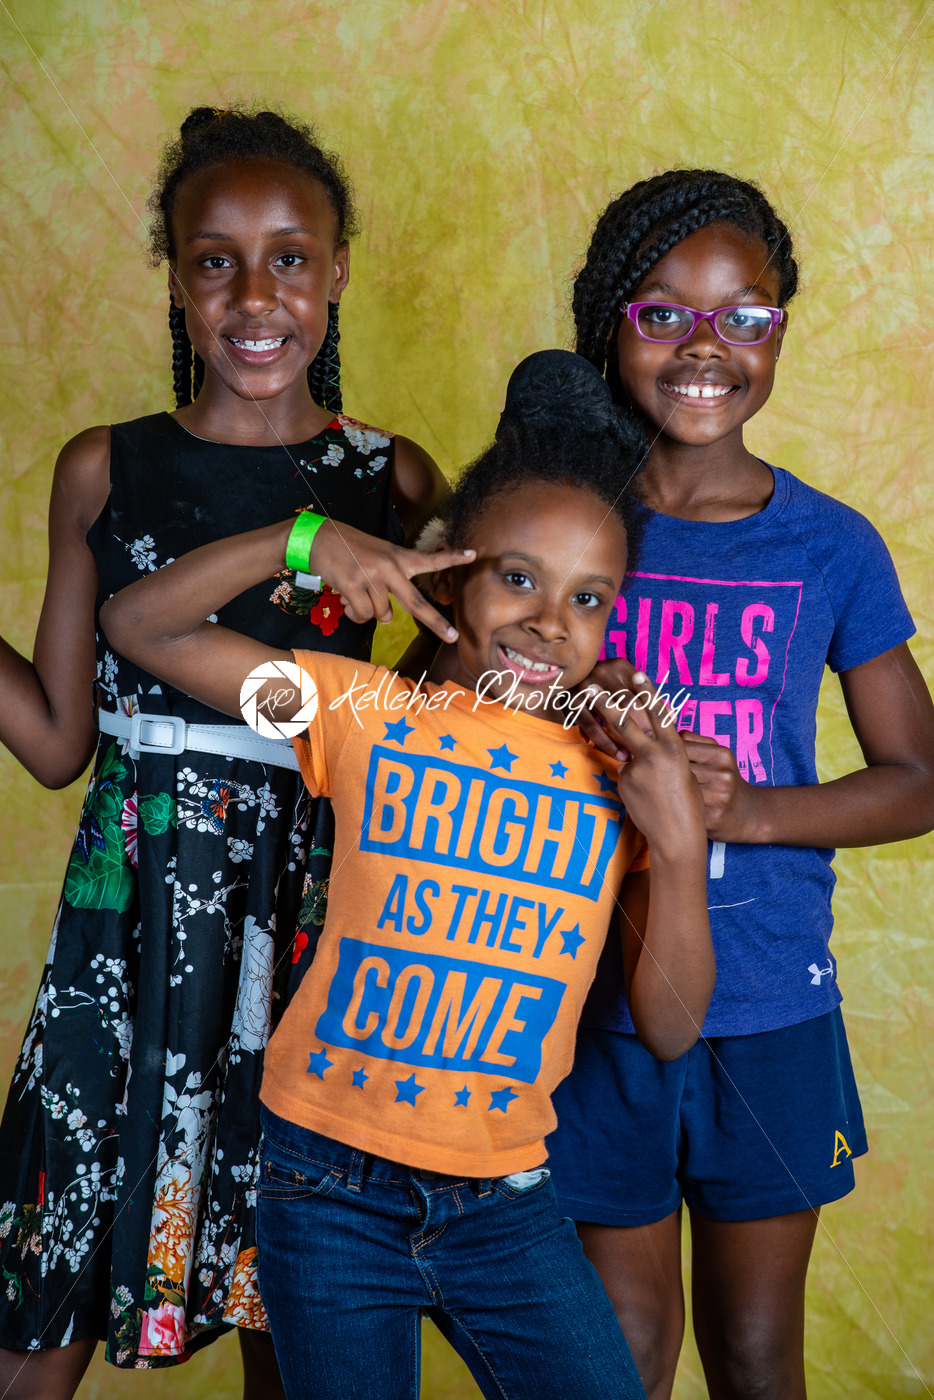 ROSEMONT, PA – MAY 15, 2019: Lower school May fair photo booth at The Agnes Irwin School - Kelleher Photography Store